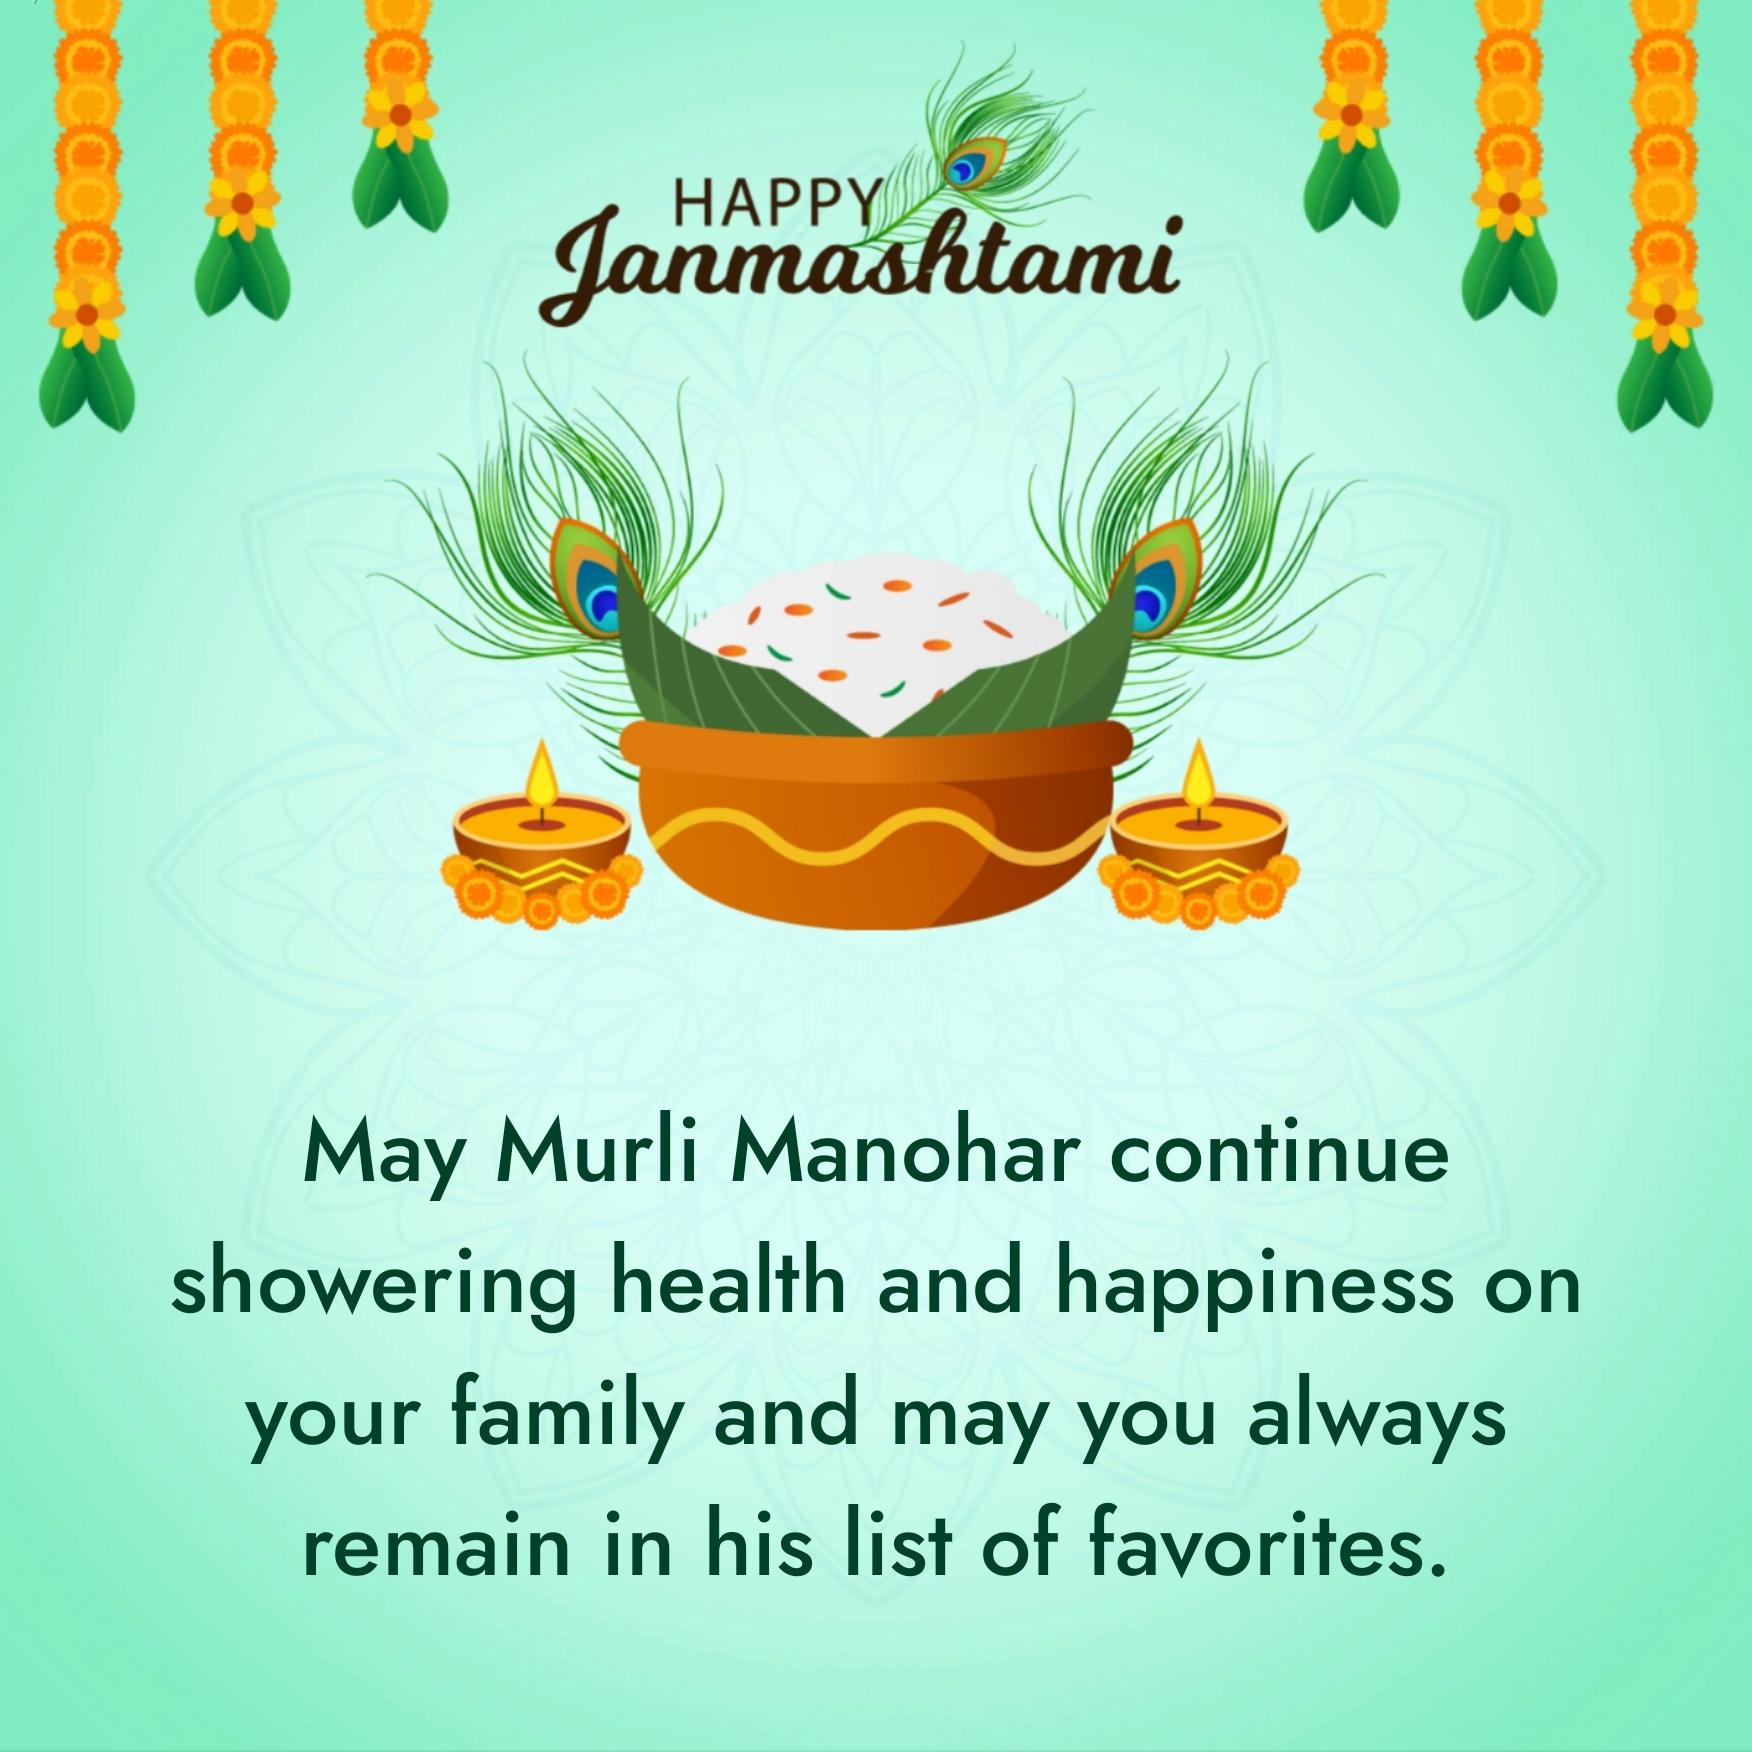 May Murli Manohar continue showering health and happiness on your family